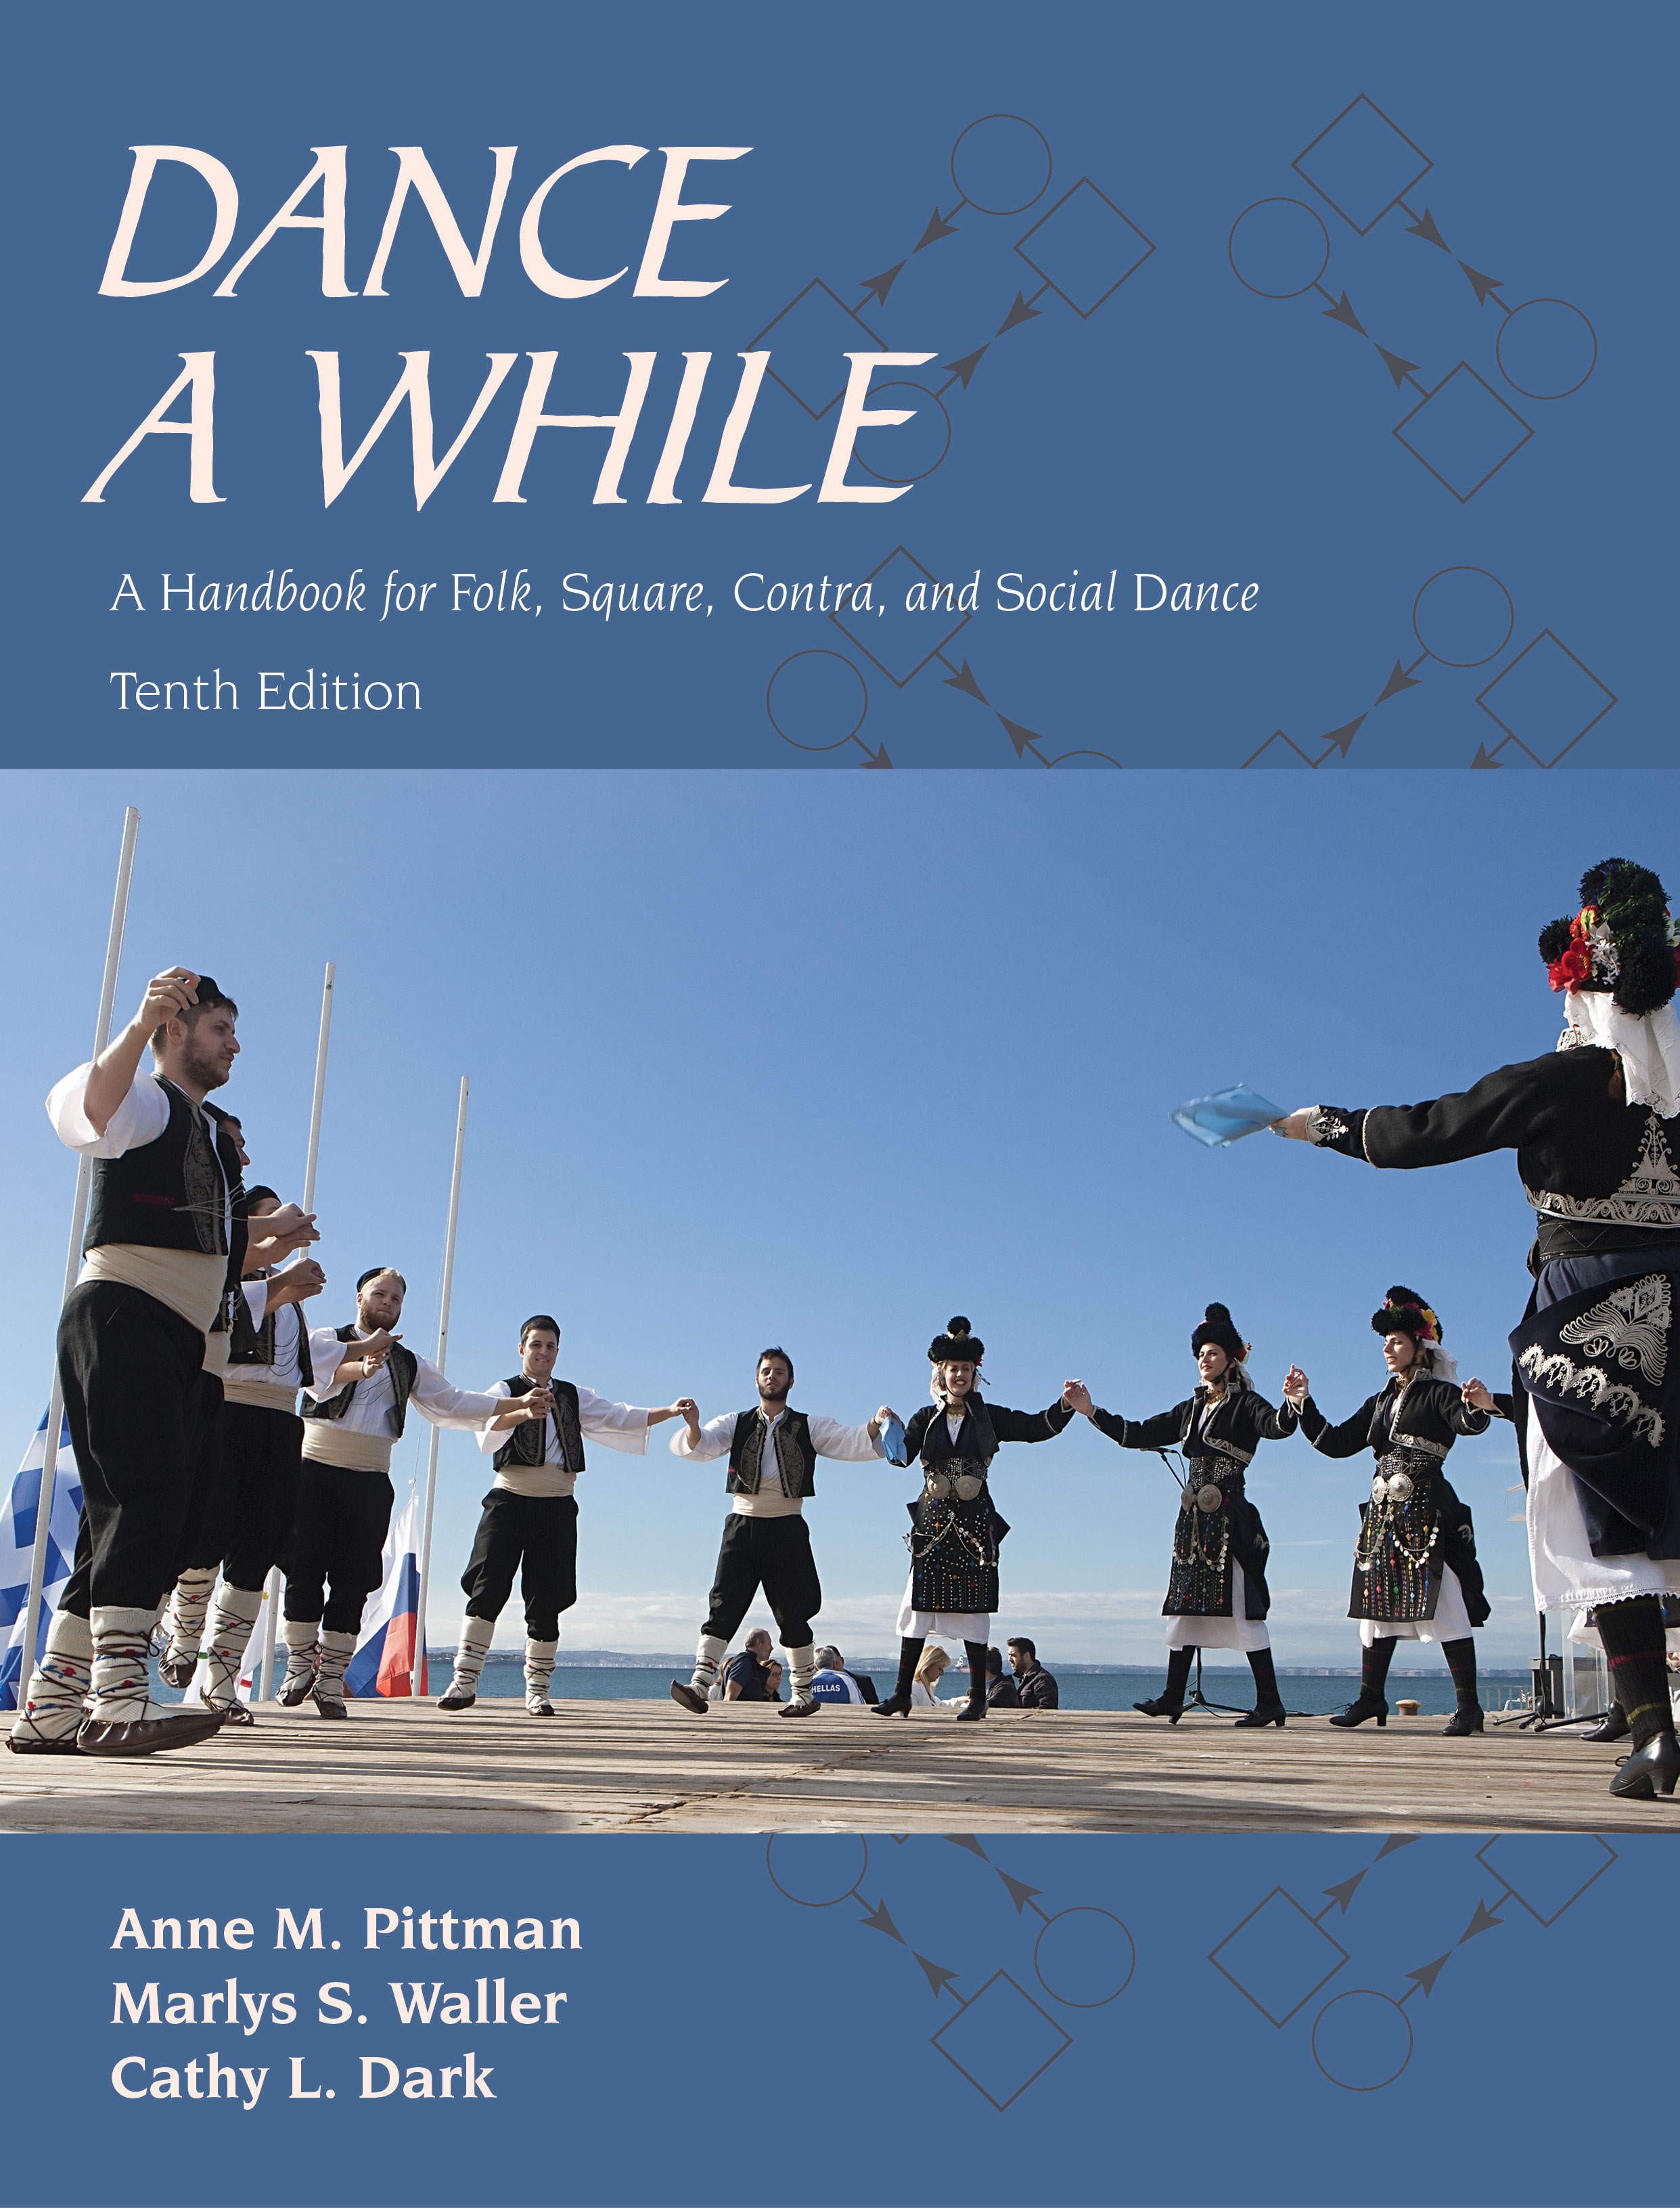 Dance a While: A Handbook for Folk, Square, Contra, and Social Dance by Anne M. Pittman, Marlys S. Waller, Cathy L. Dark